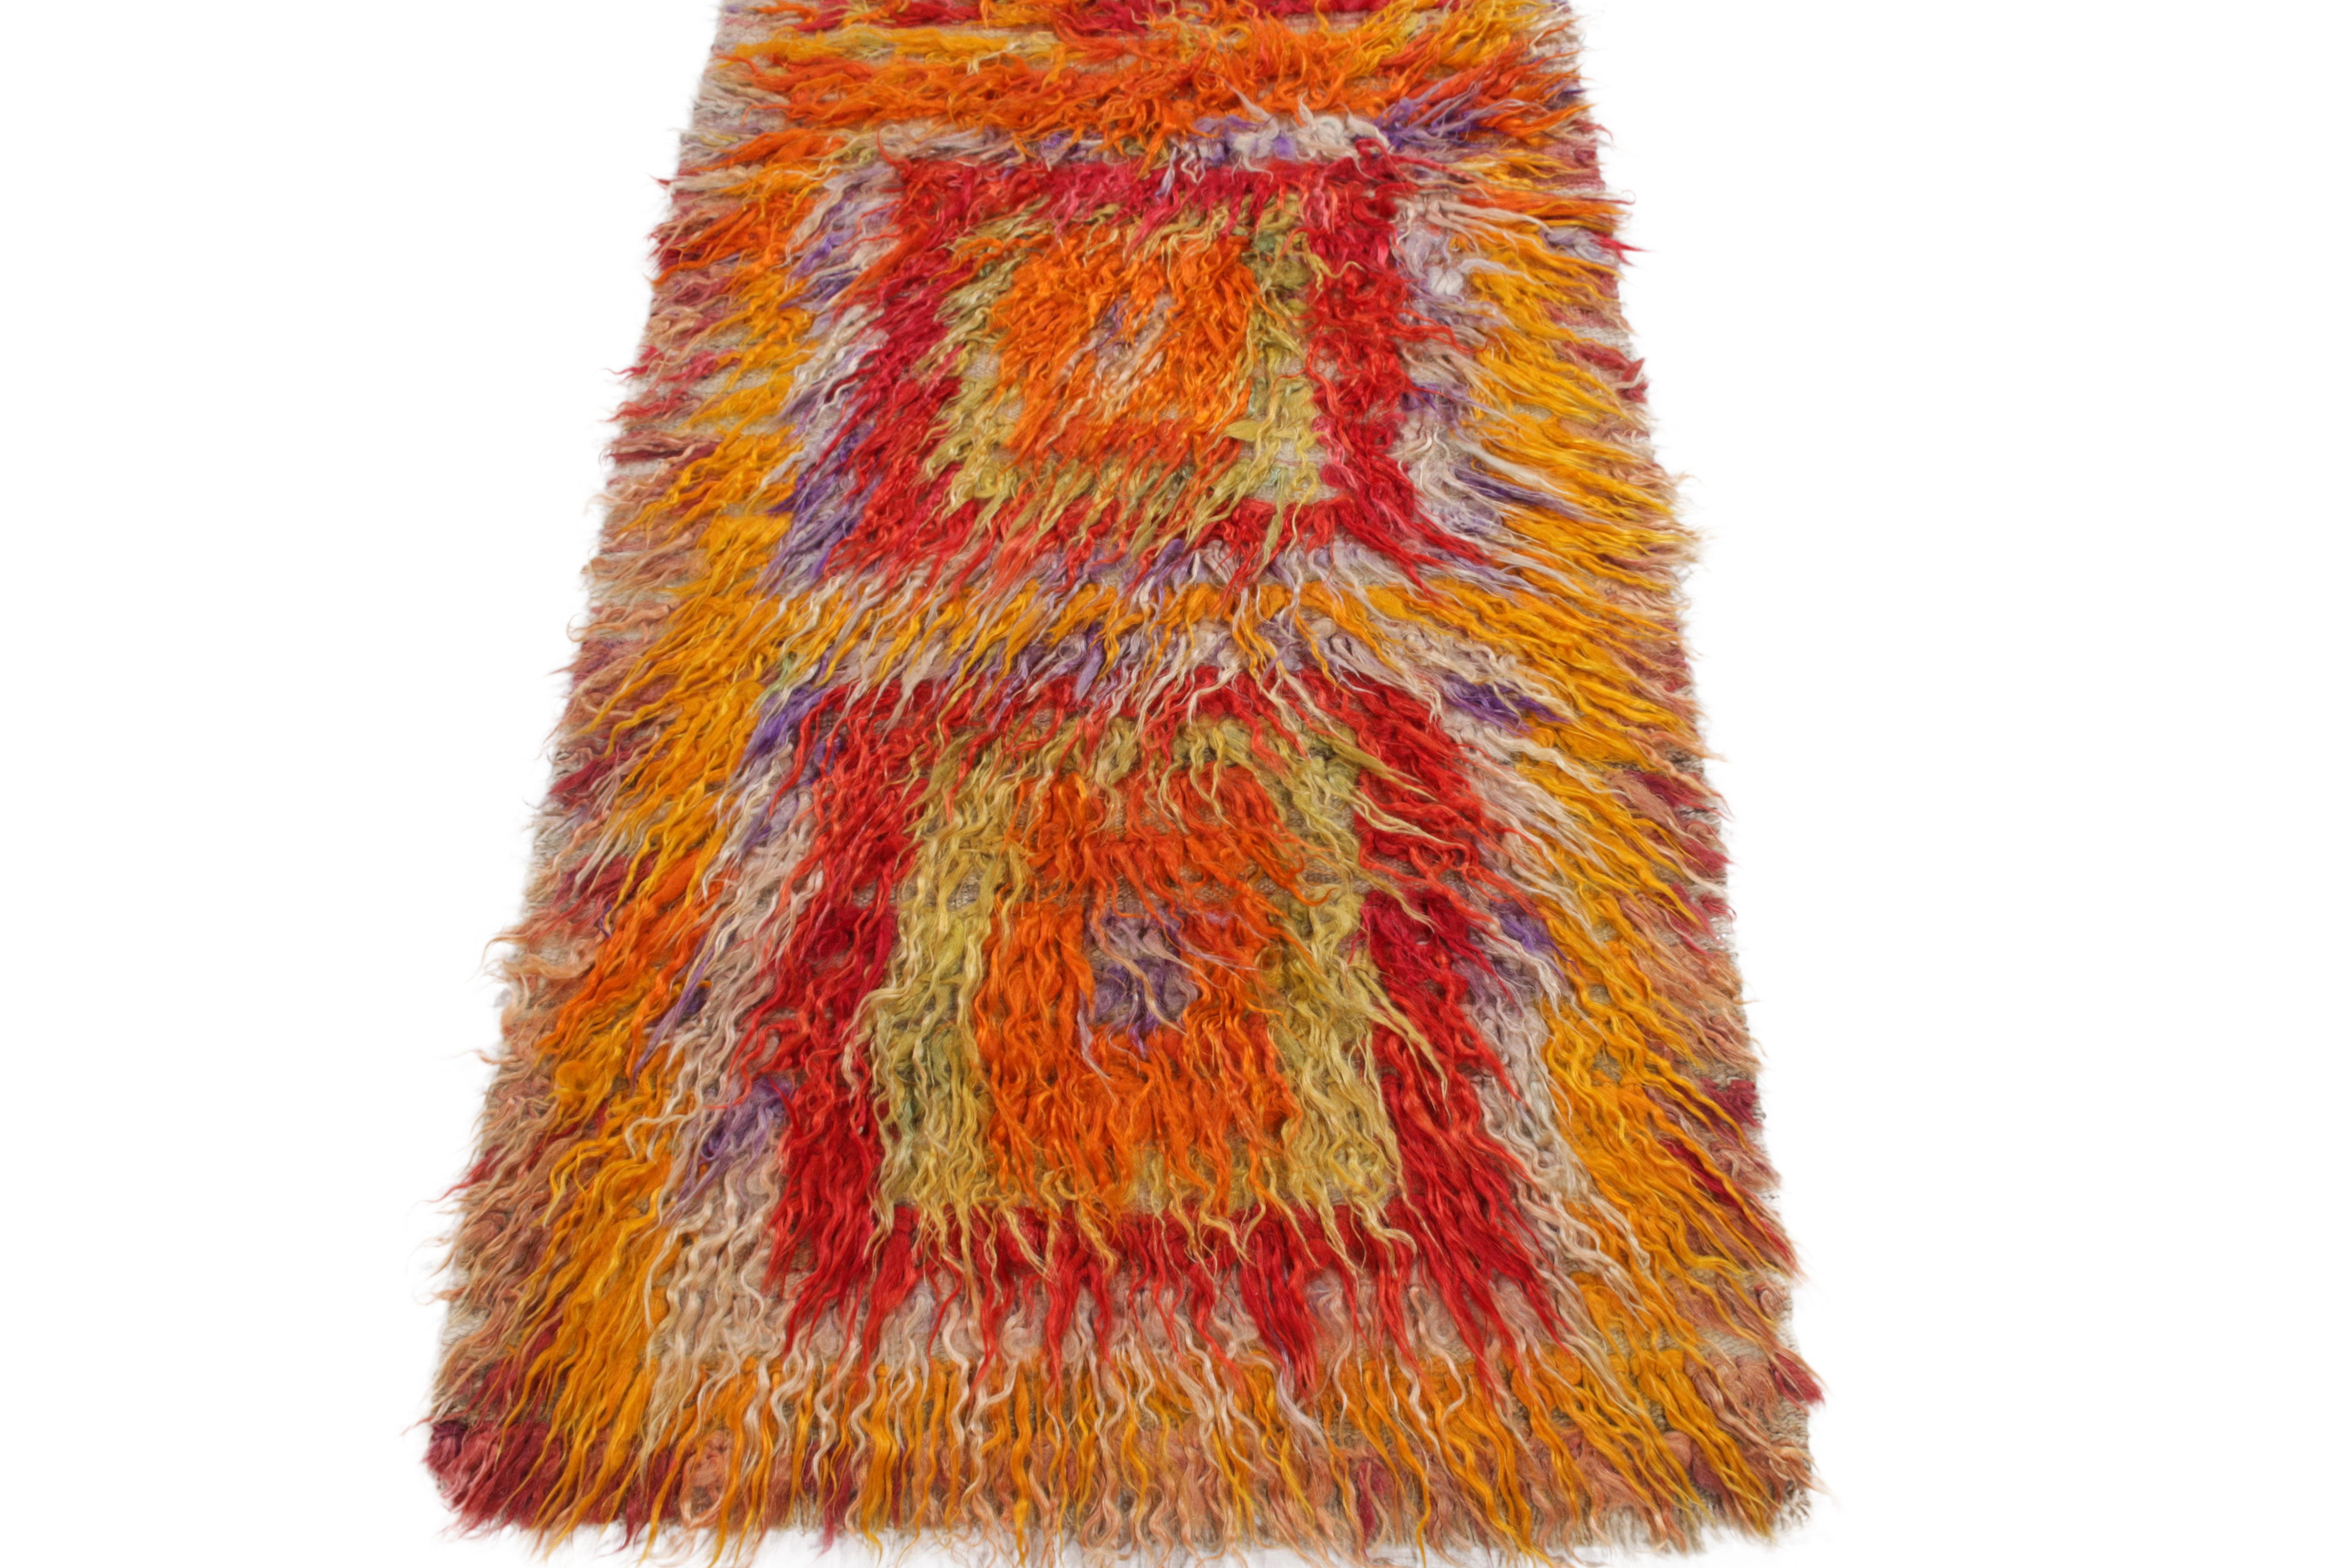 A 3x5 vintage Tulu rug from Turkey emanating exceptional mid-century aesthetics with high low texturability in a multicolor shag pile. 

Hand-knotted in lush wool, this rug further brings liveliness with a tribal geometric pattern in red, yellow,